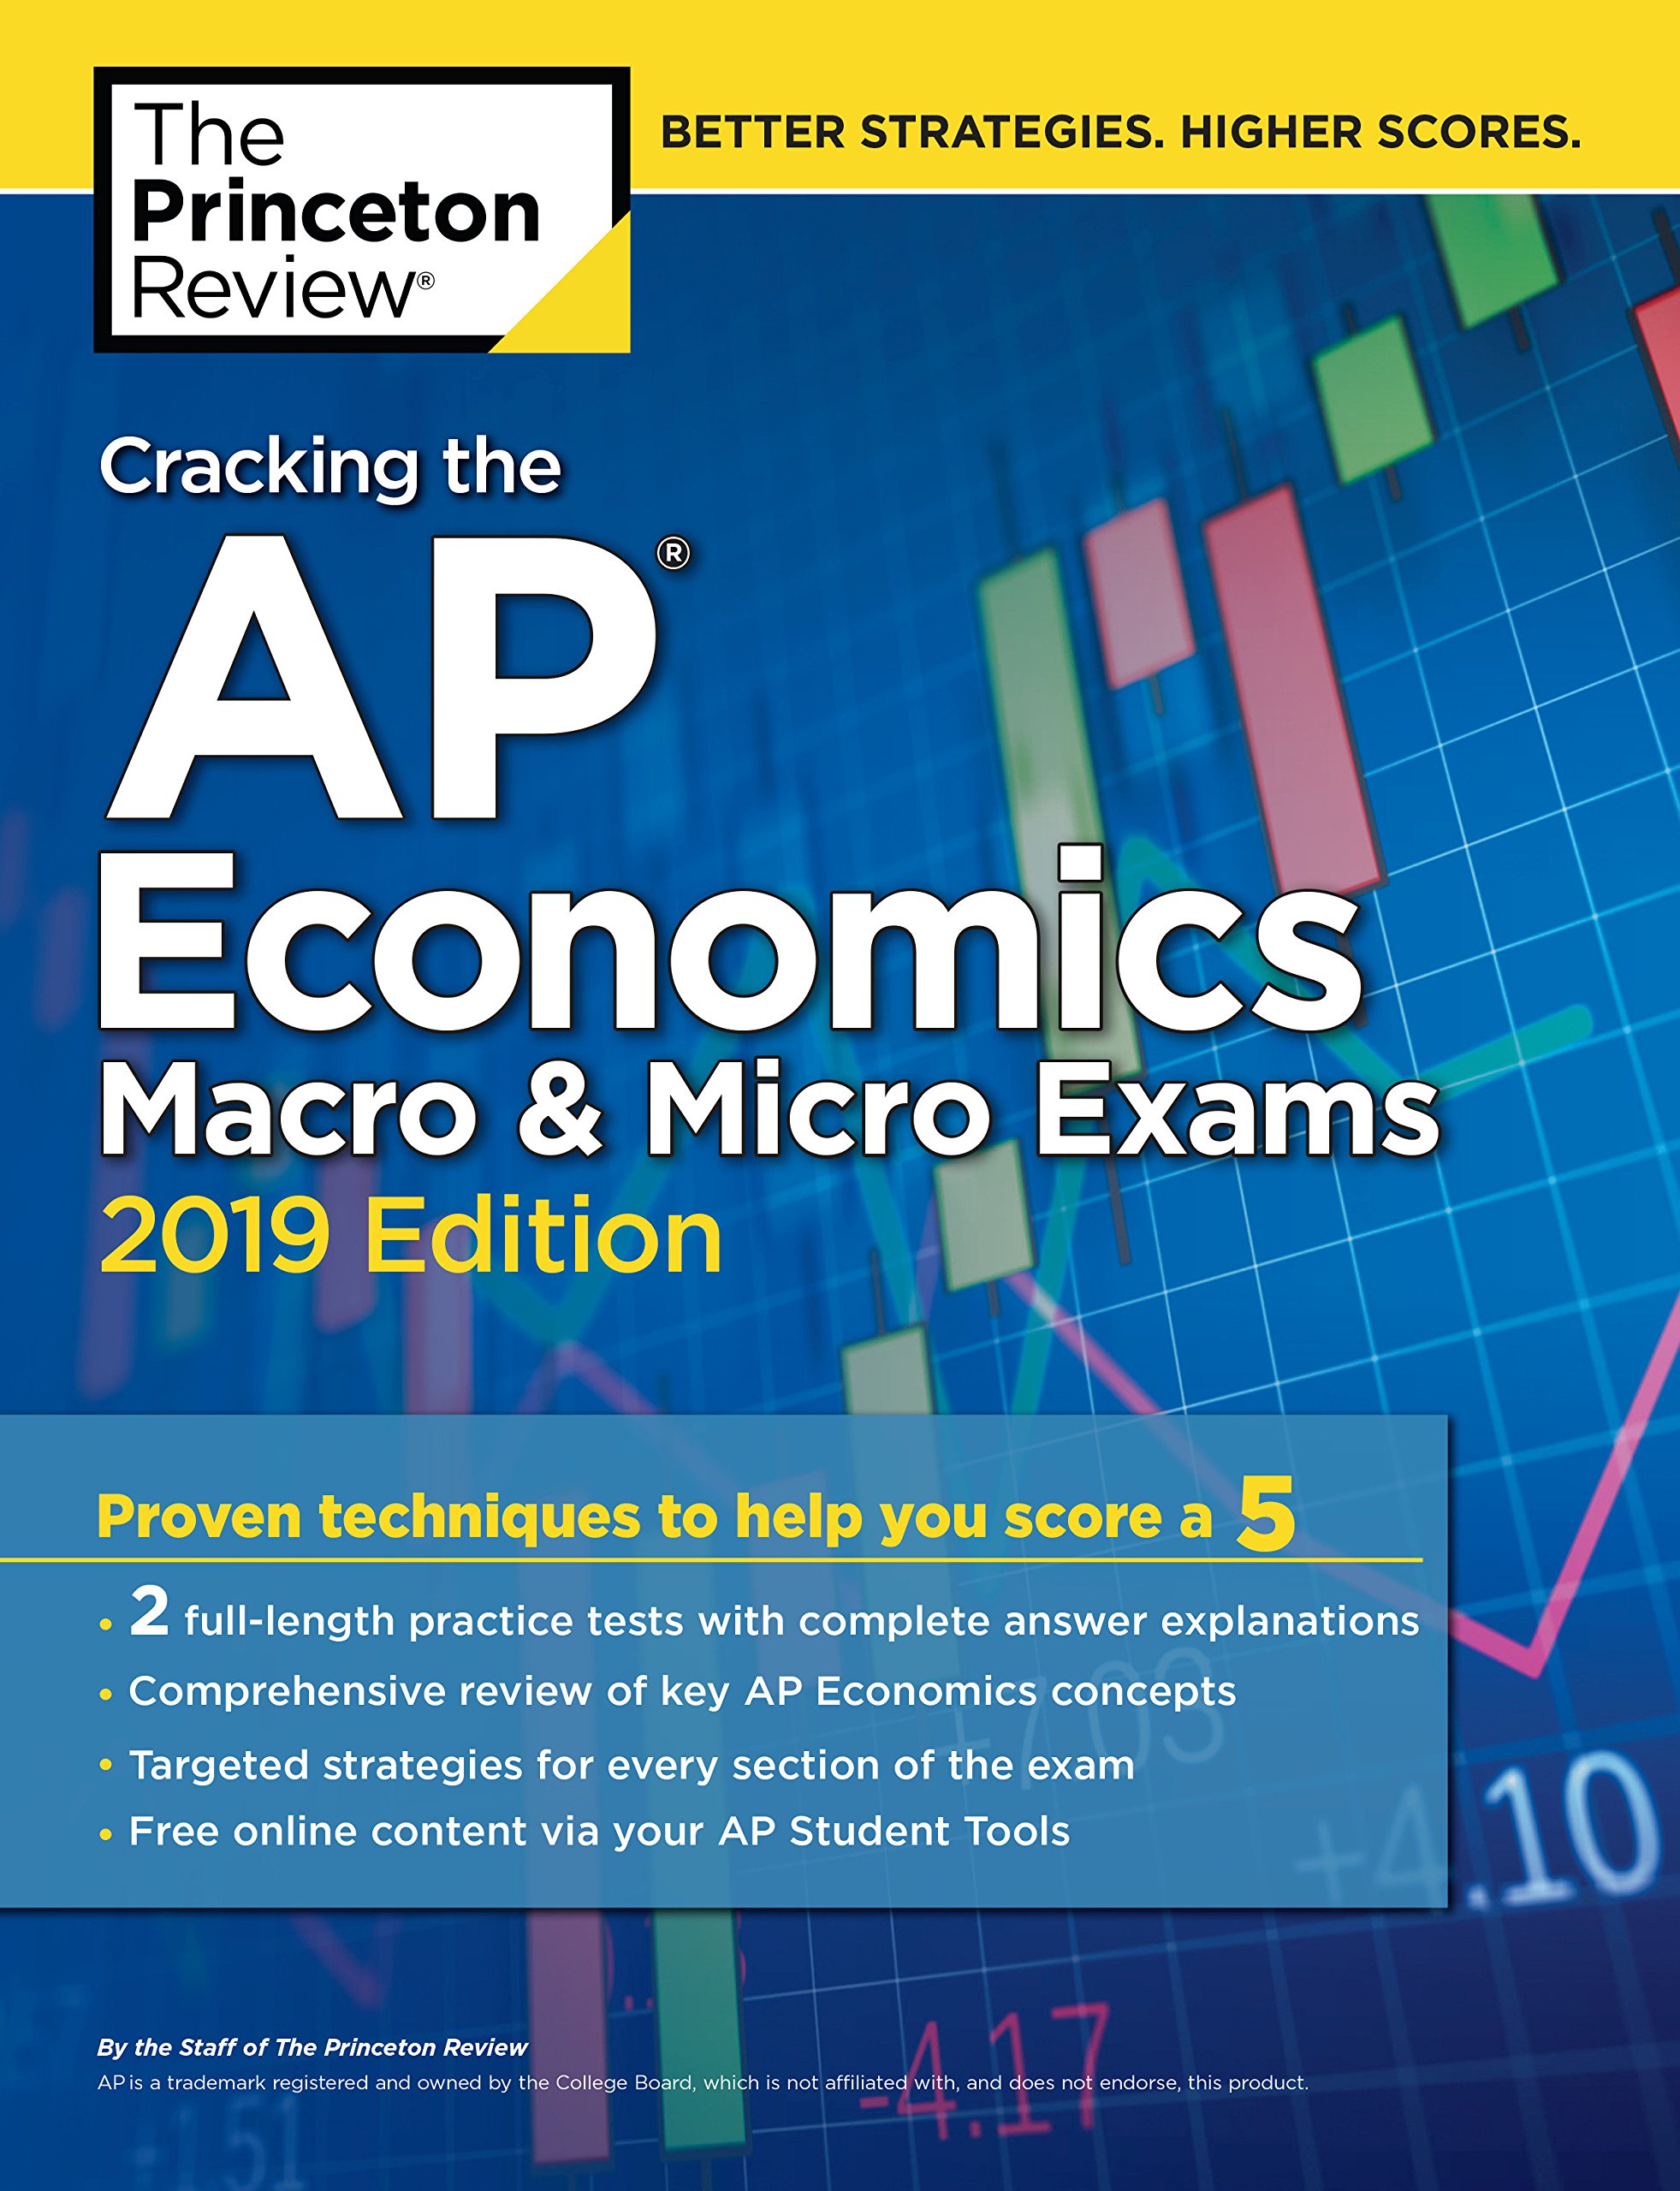 Cracking the AP Economics Macro & Micro Exams, 2019 Edition: Practice Tests & Proven Techniques to Help You Score a 5 (College Test Preparation)